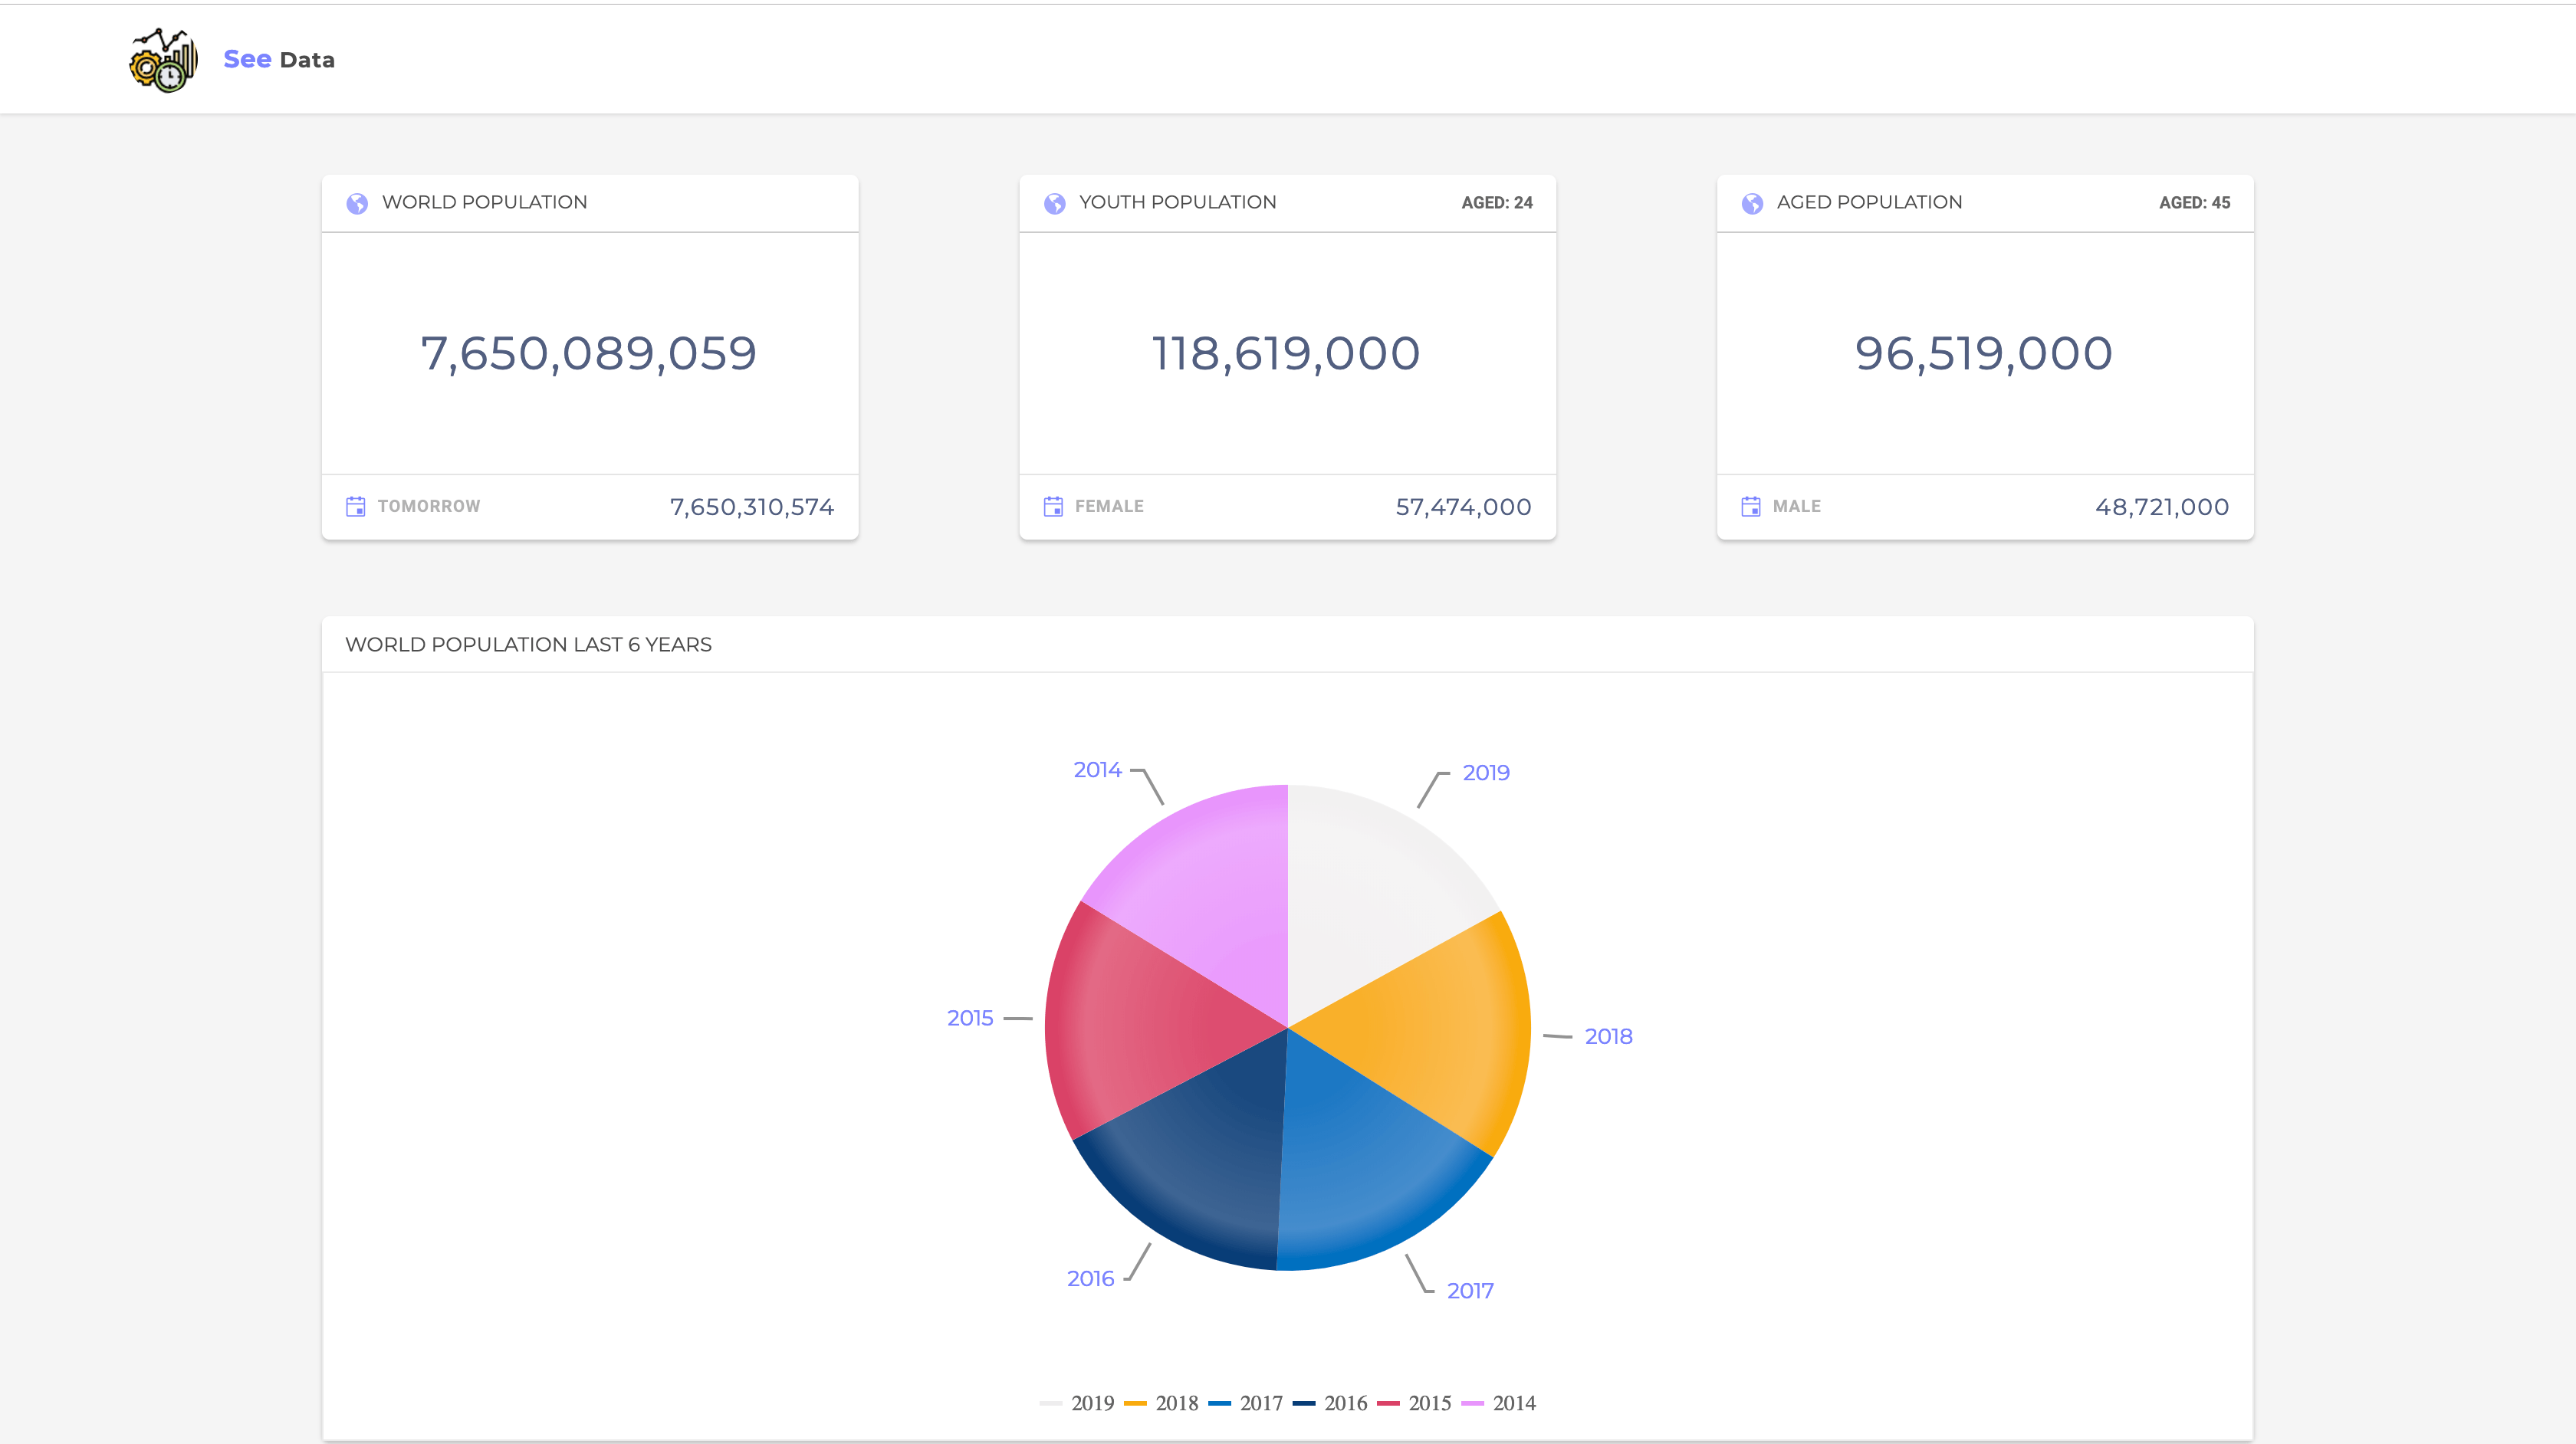 component works as expected to display the pie chart